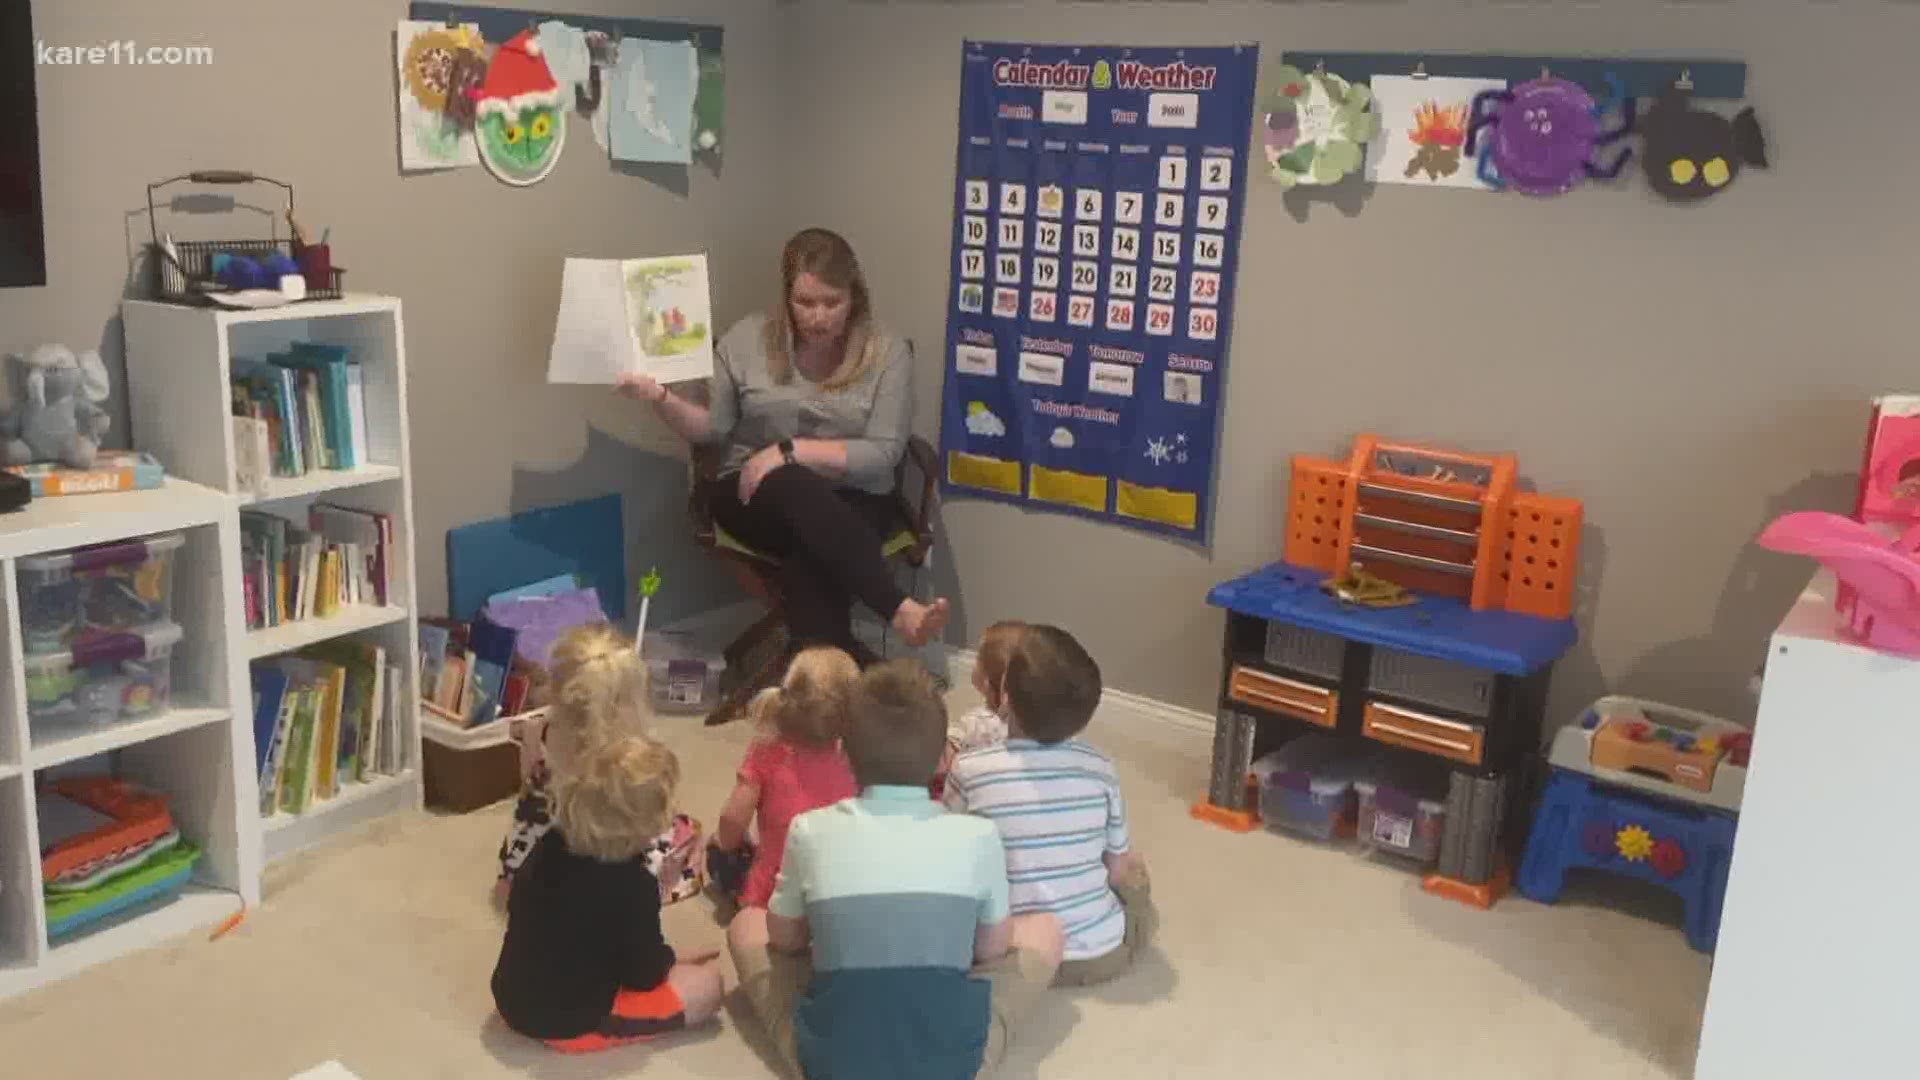 After a KARE 11 story last month revealing that thousands had been denied help, Gov. Tim Walz proposed a new round of grants for child care providers who stayed open